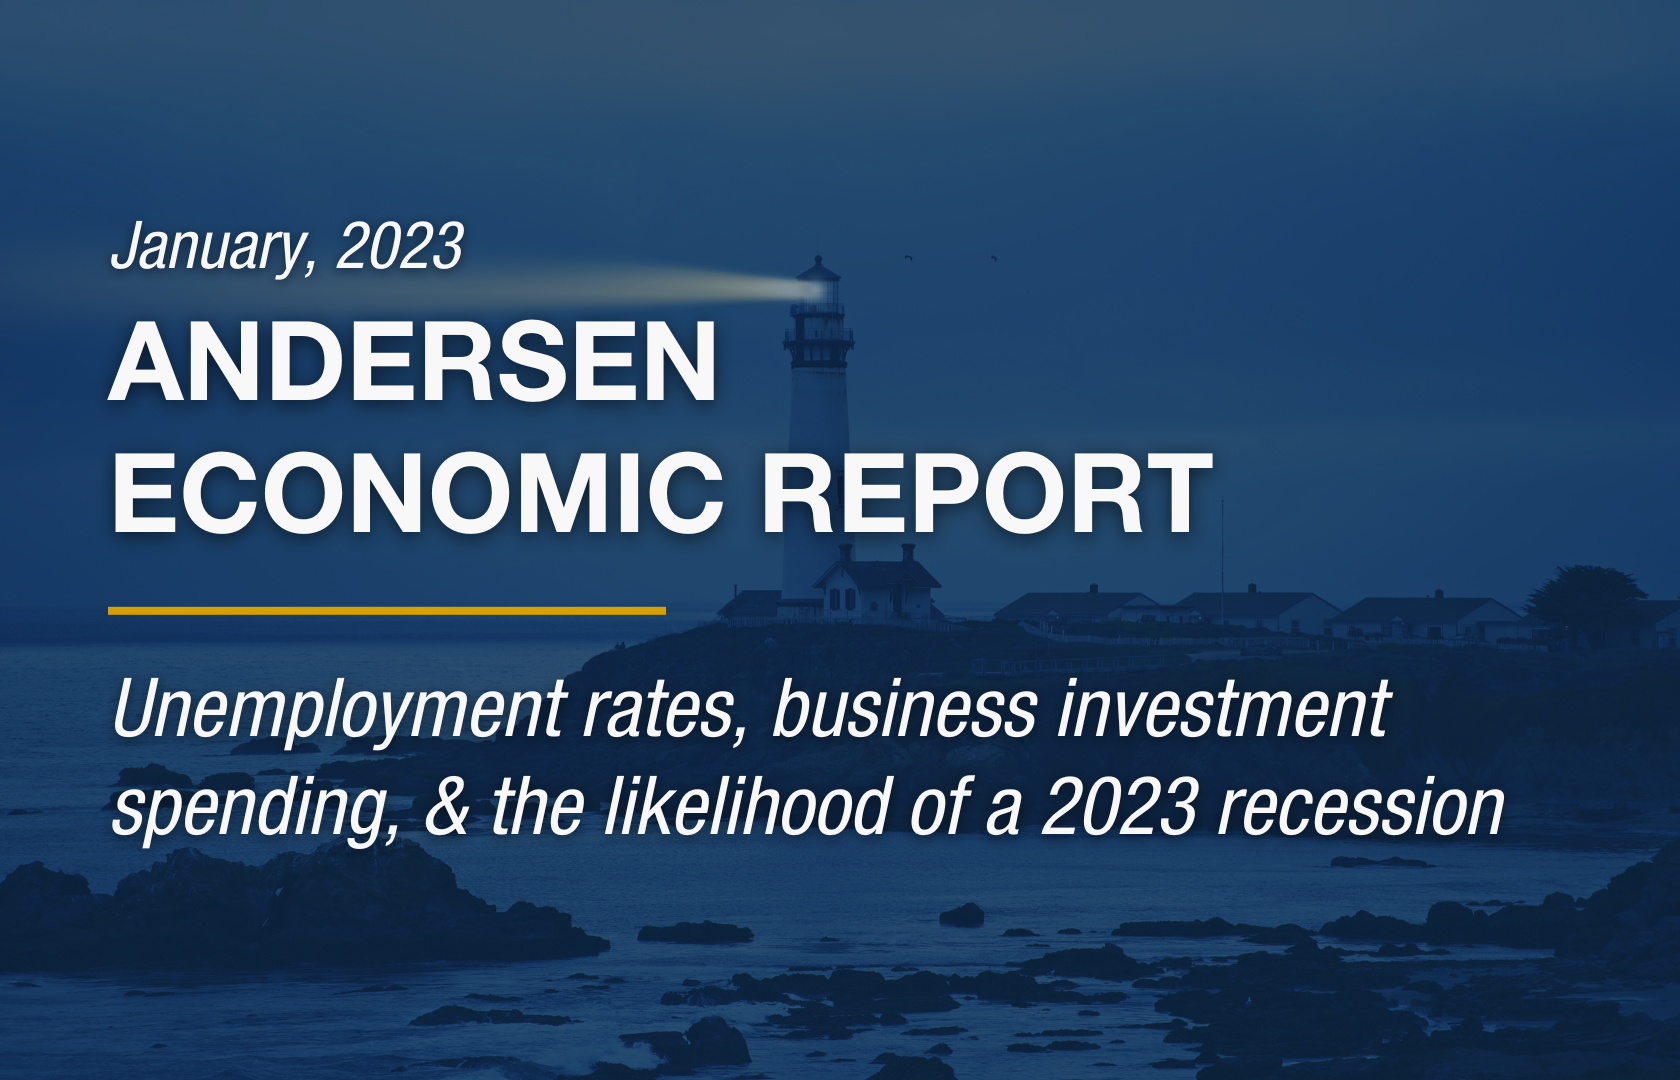 January 2023 Andersen Economic Report: Unemployment rates, business investment spending, & the likelihood of a 2023 recession